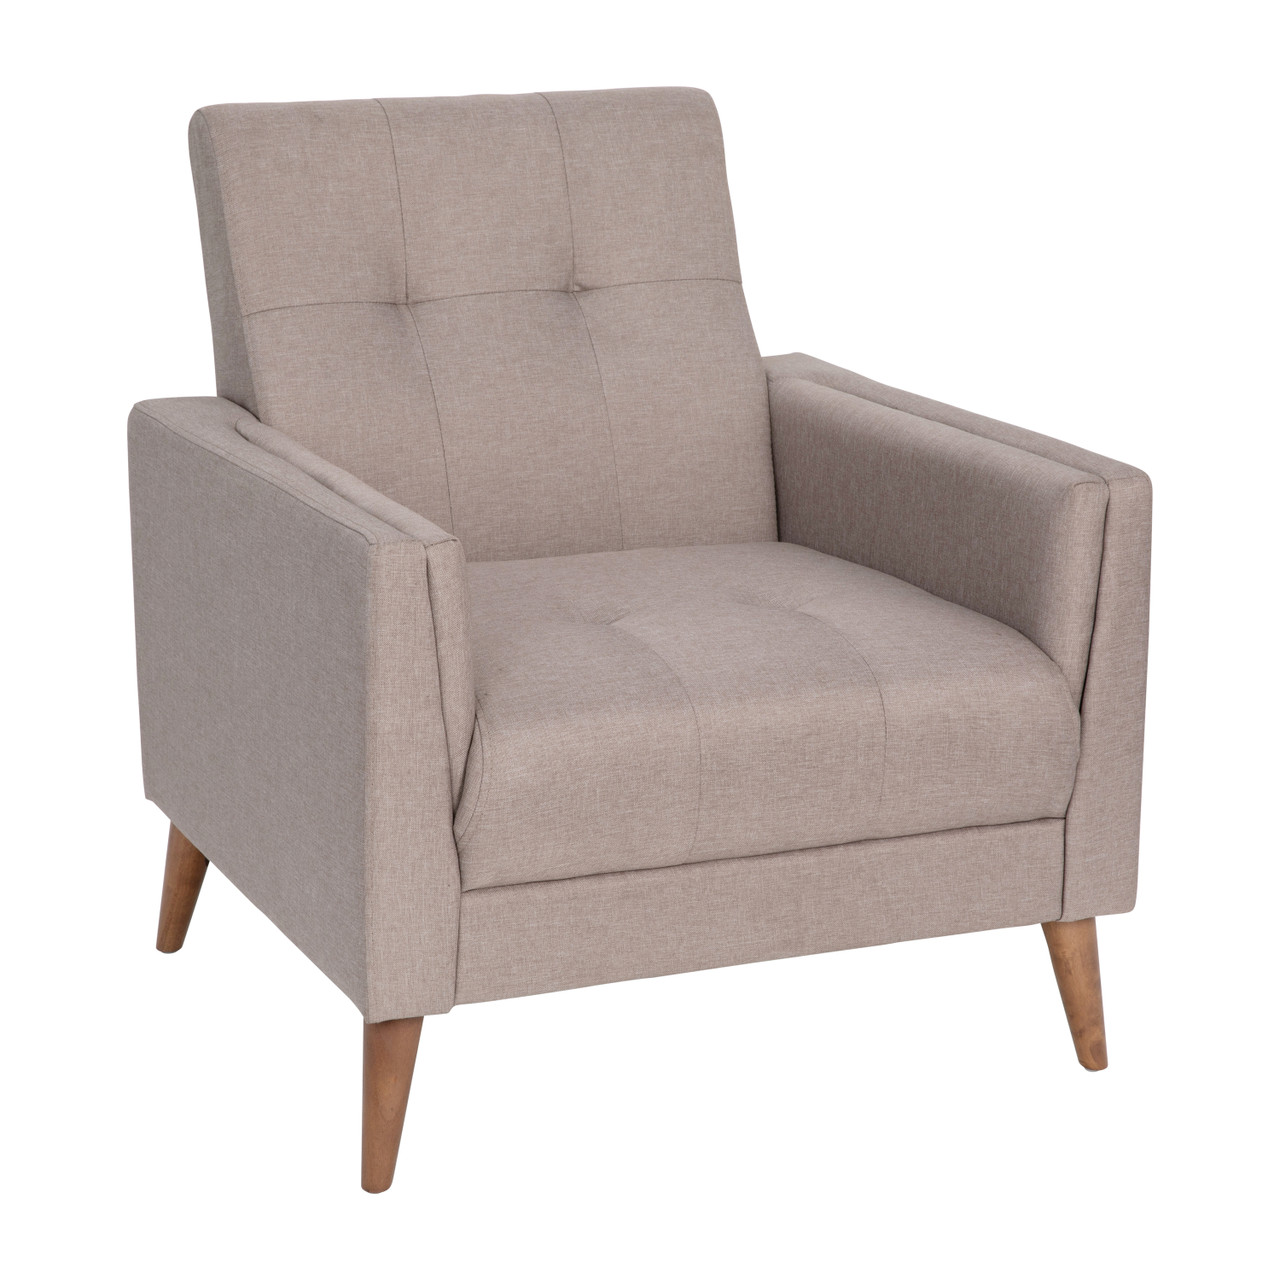 Flash Furniture Conrad Mid-Century Modern Commercial Grade Armchair w/ Tufted Faux Linen Upholstery & Solid Wood Legs in Taupe, Model#